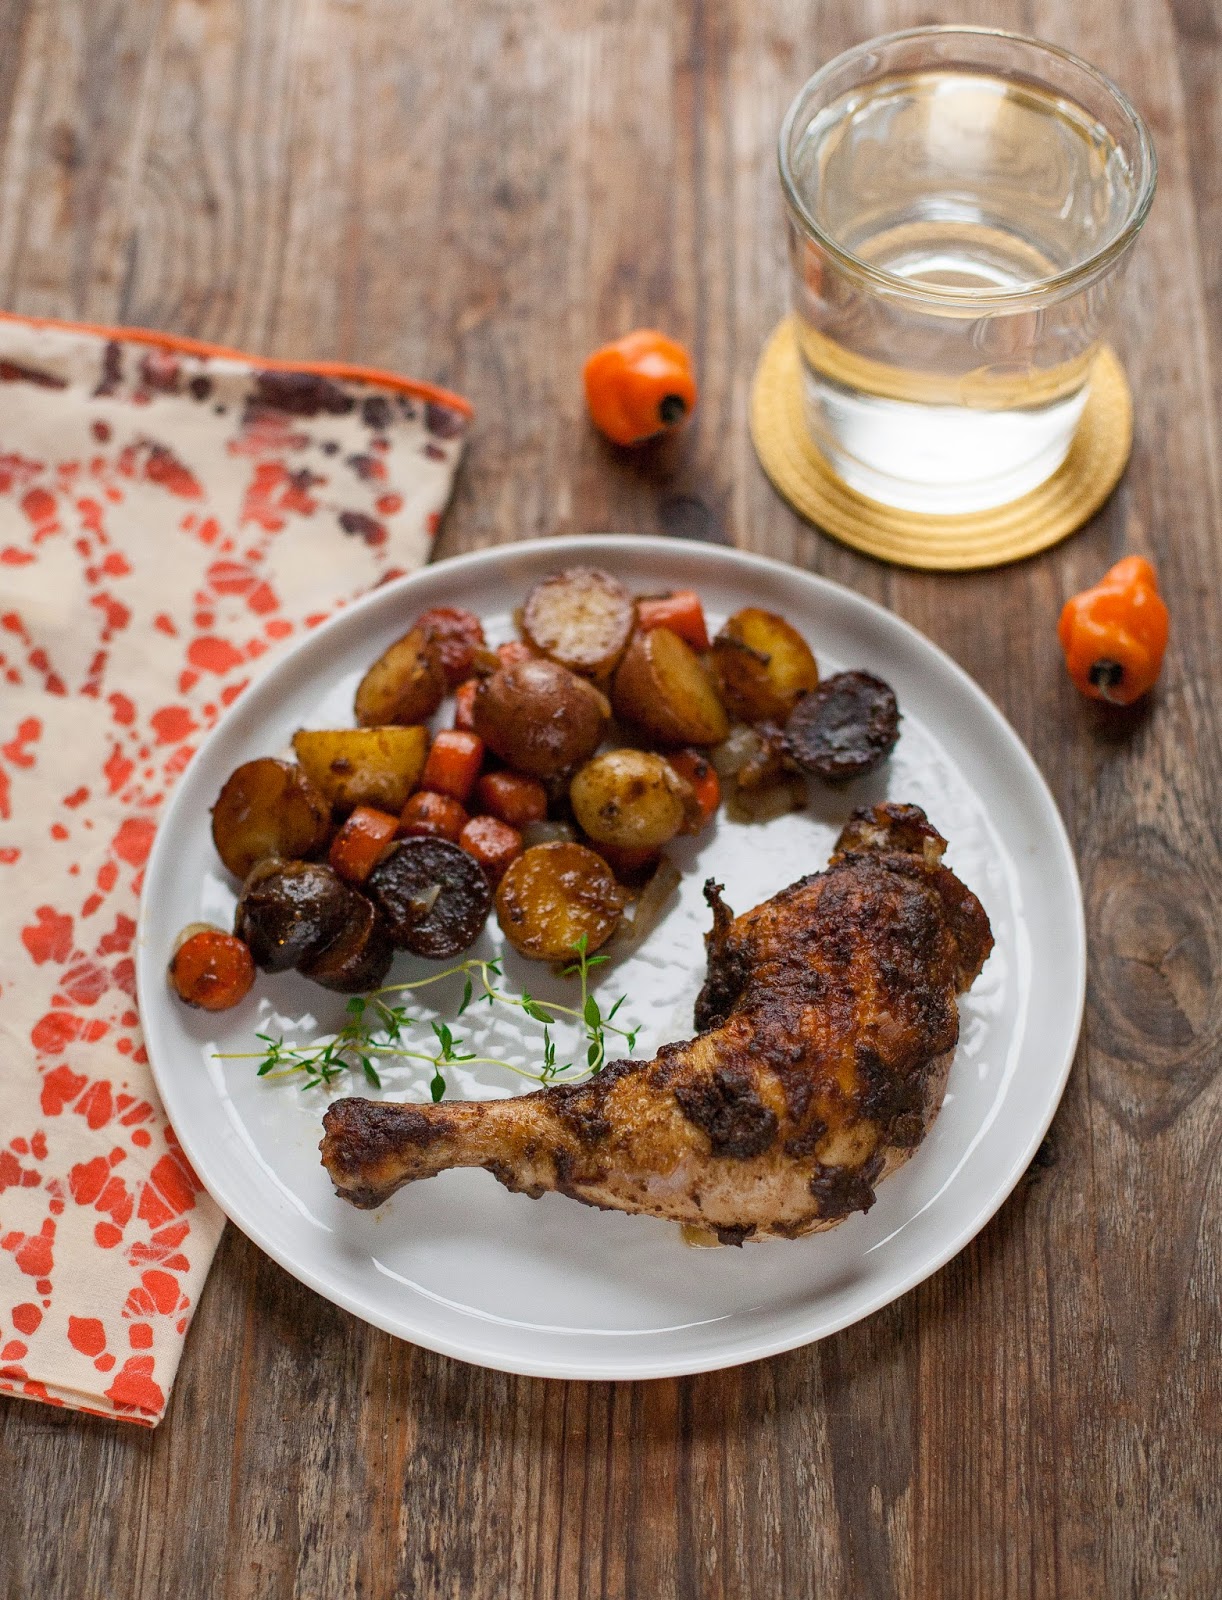 Roasted Jerk Chicken with Carrots and Potatoes (Gluten free, Paleo, Whole30) | acalculatedwhisk.com